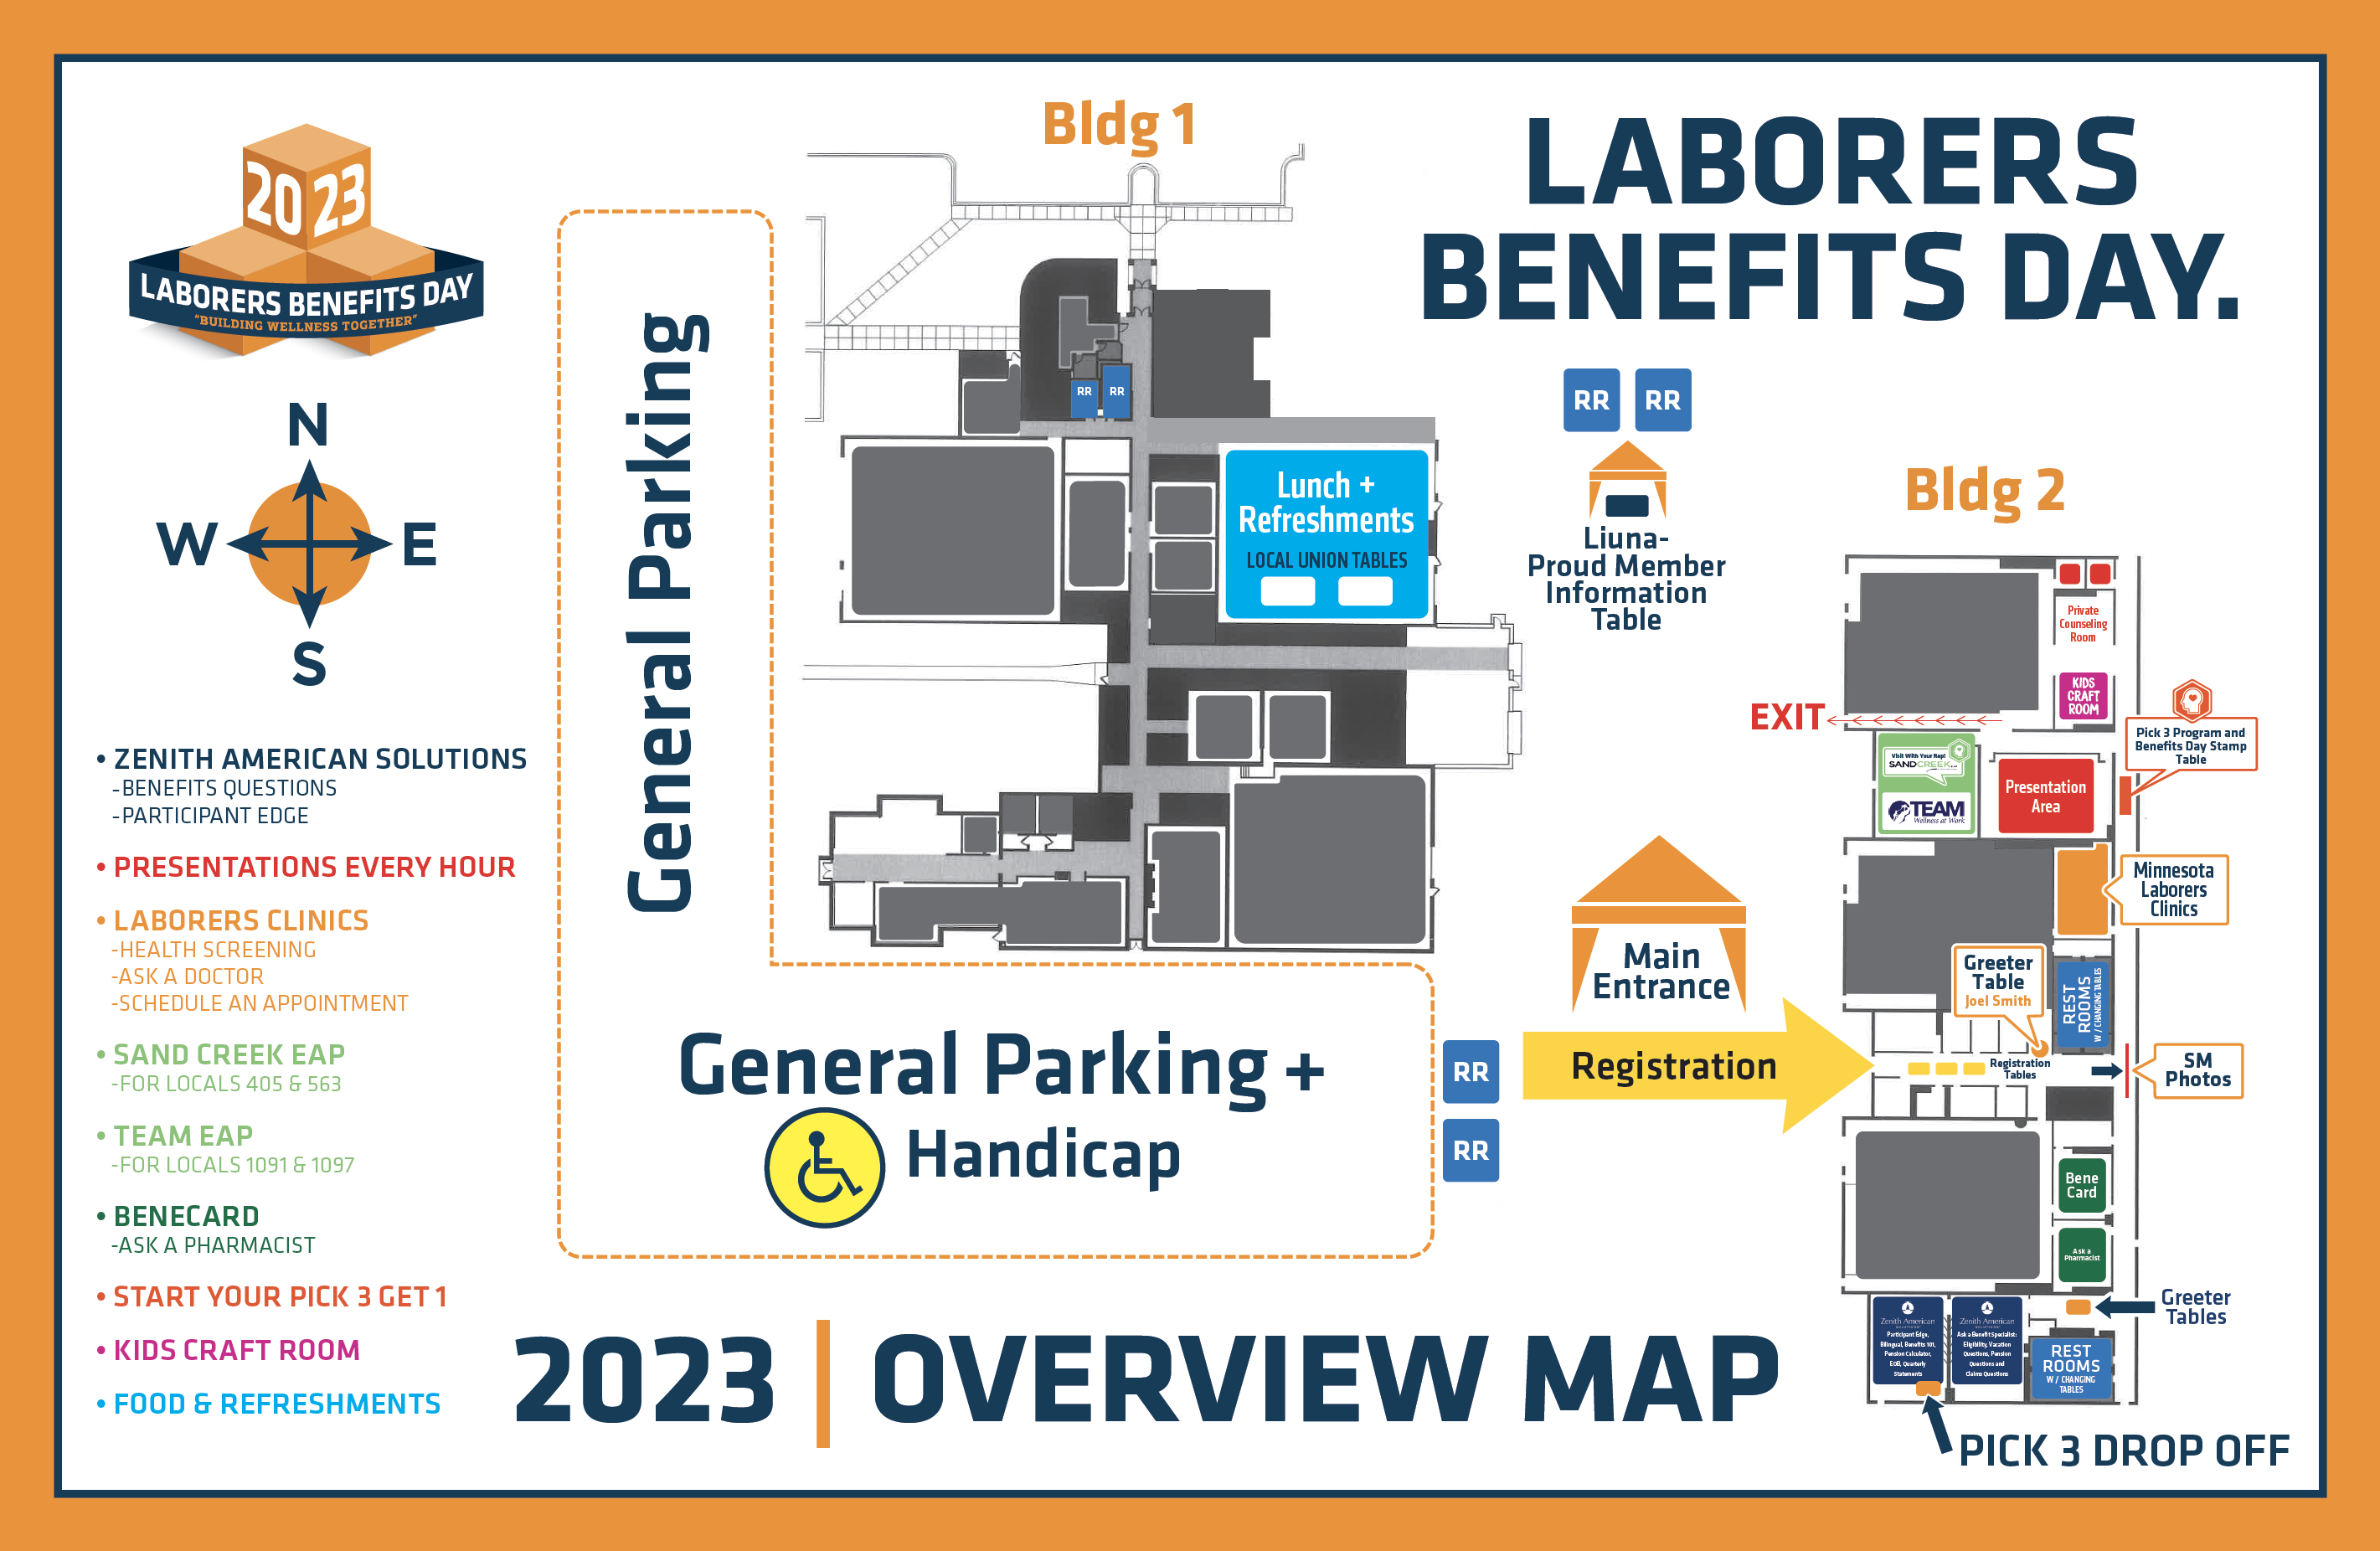 Laborers Benefits Day 2023 Overview Map